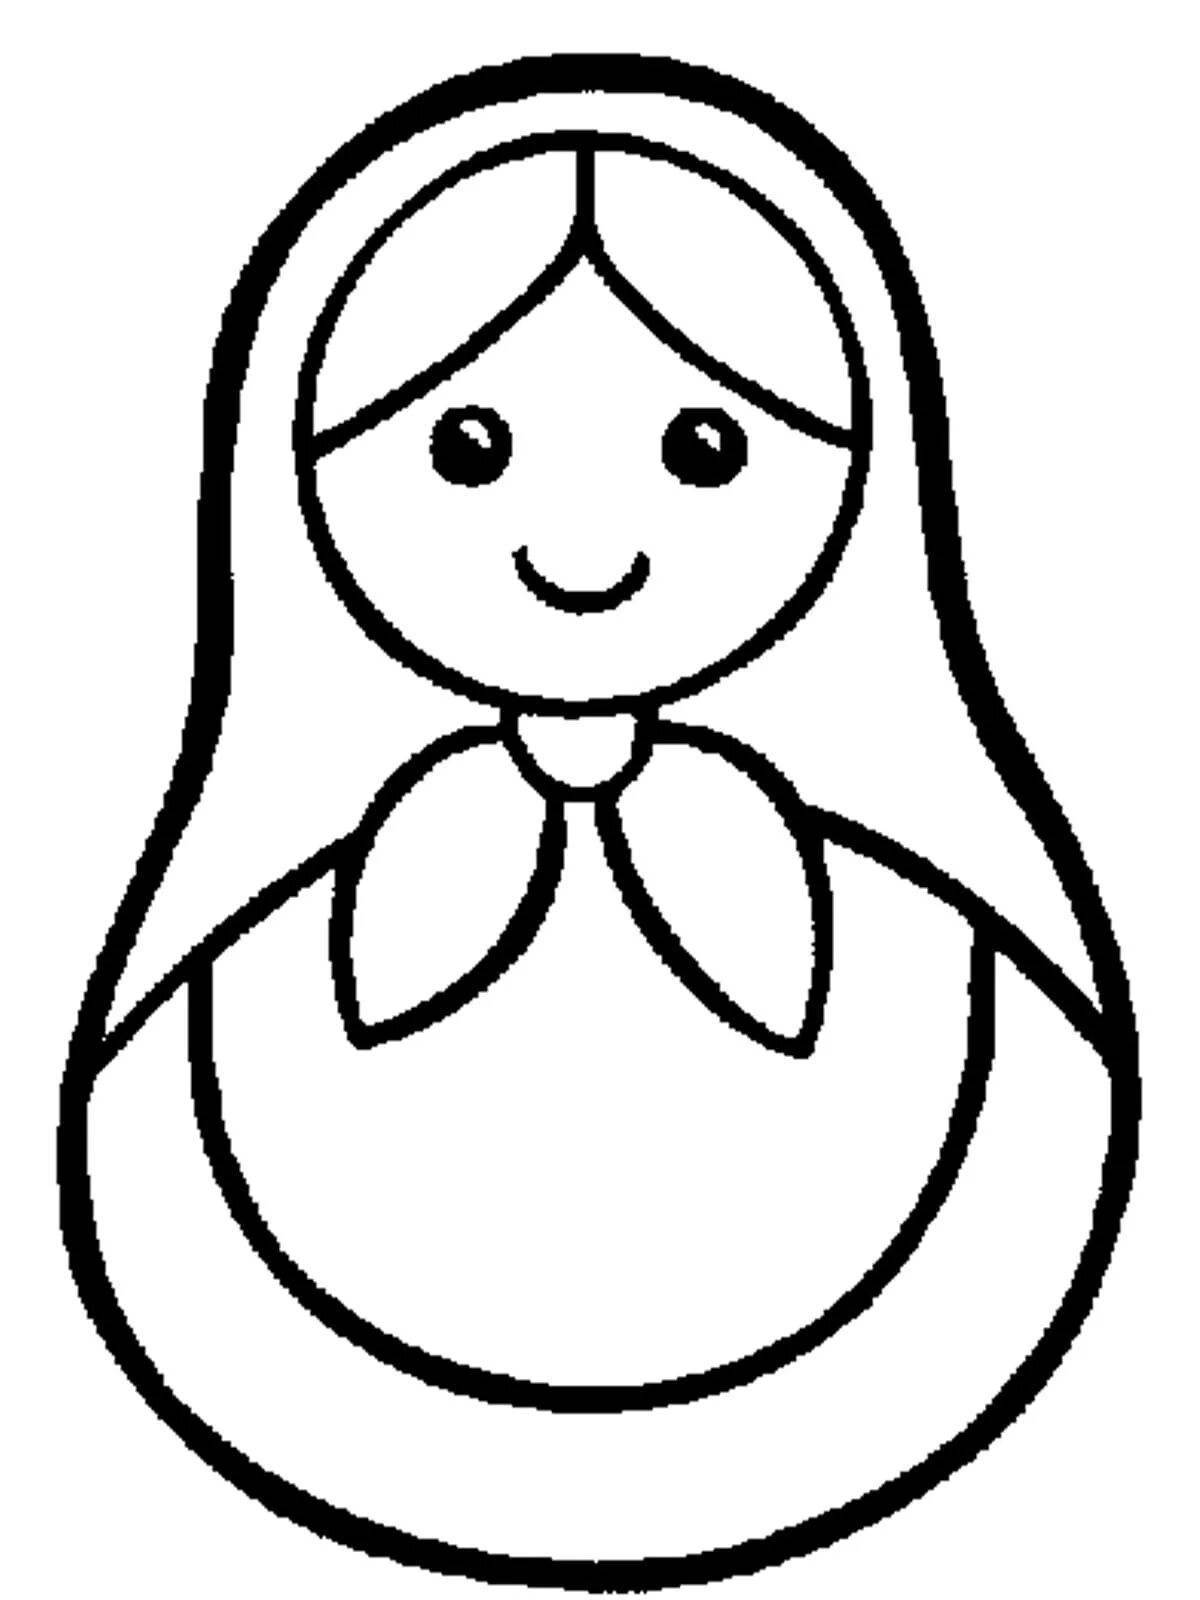 Great matryoshka coloring page for 5-6 year olds